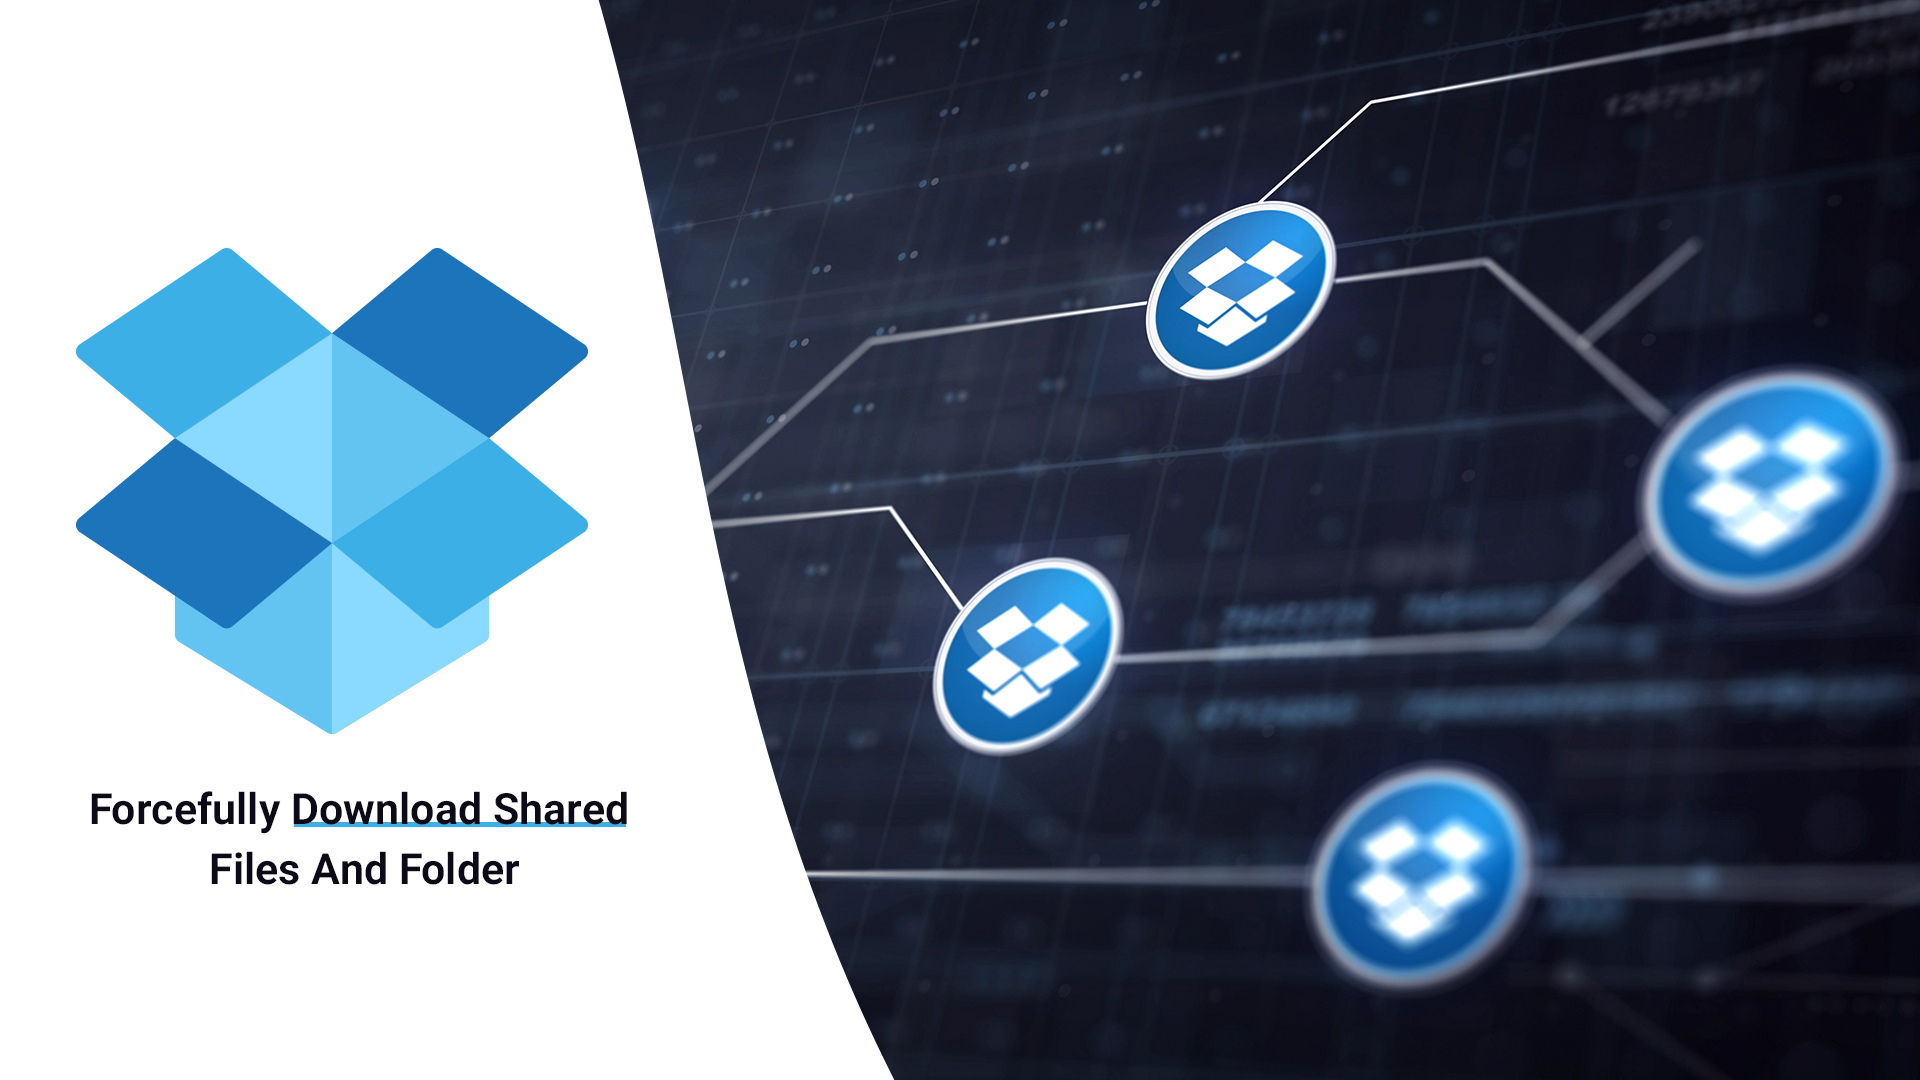 Dropbox - Forcefully Download Shared Files And Folder